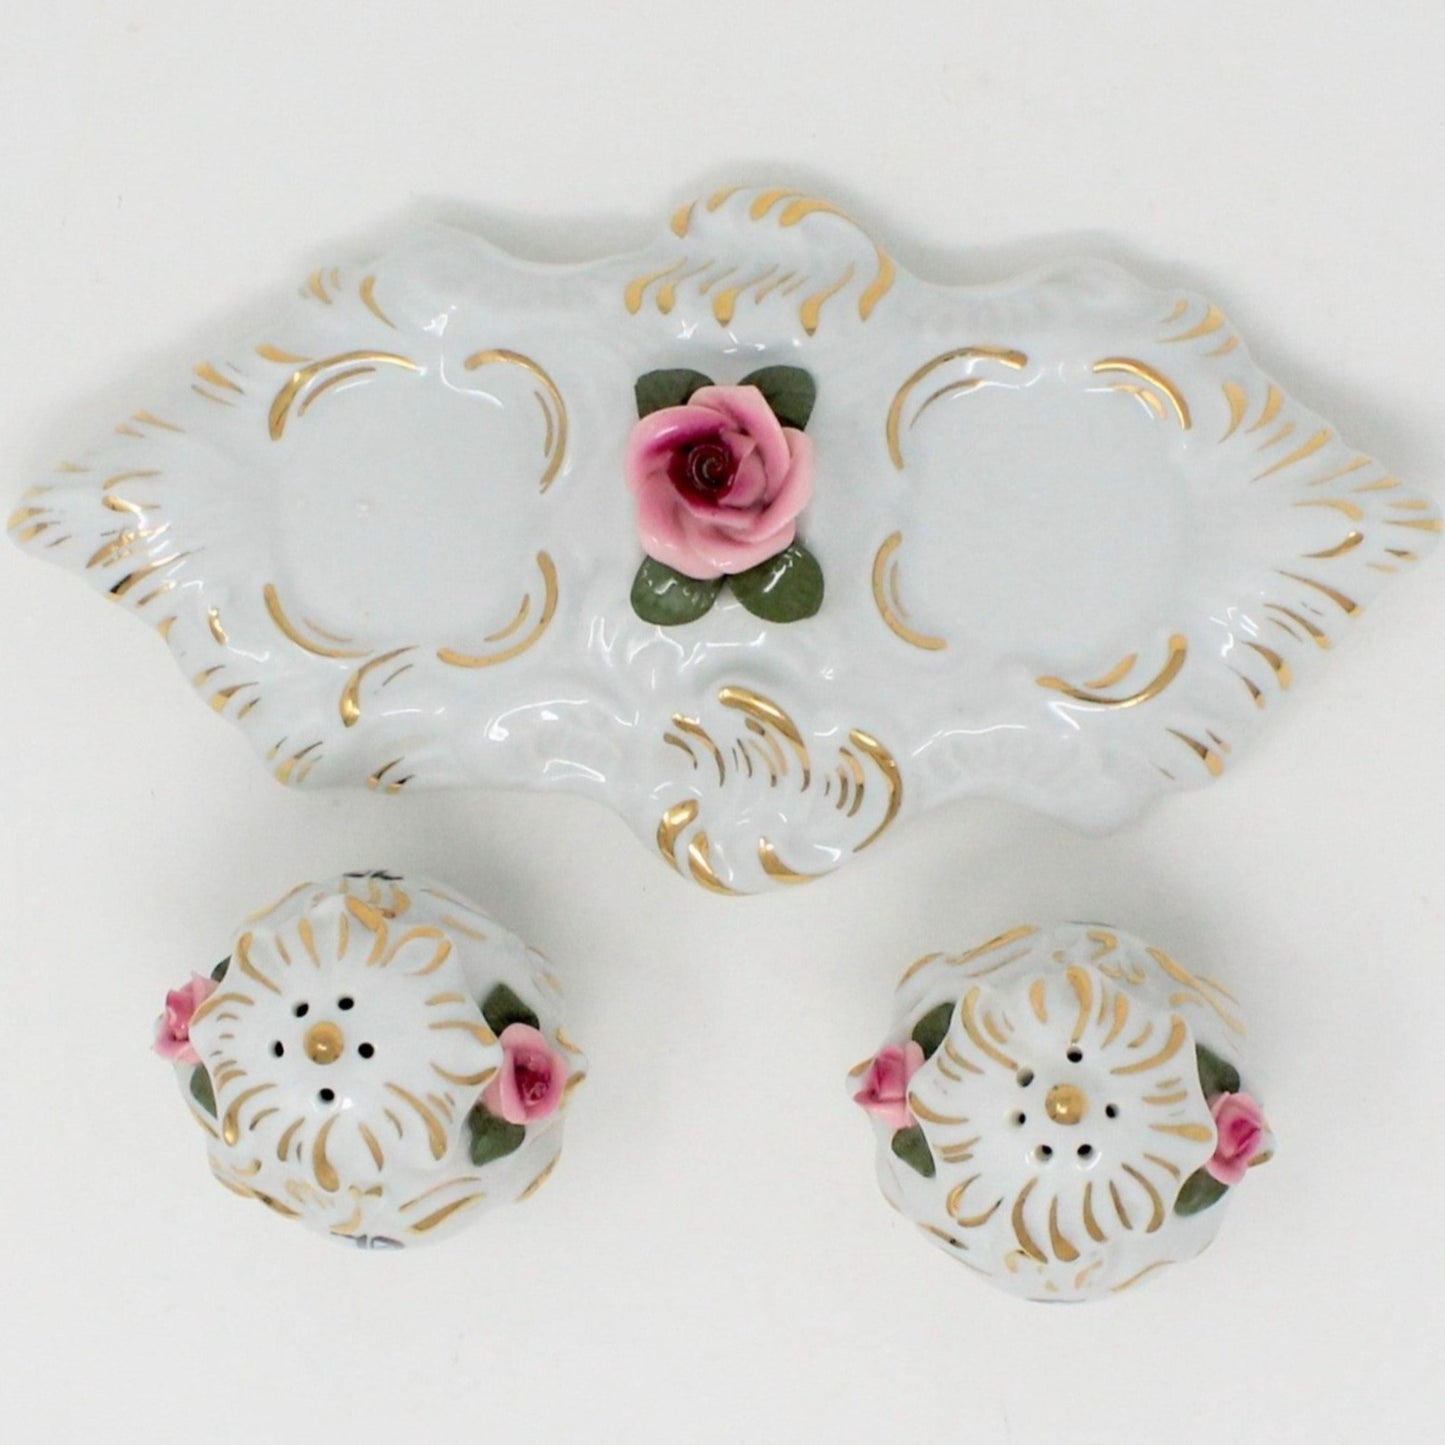 Salt and Pepper Shakers with Tray, Dresden Style, Hand Applied Pink Roses, Vintage